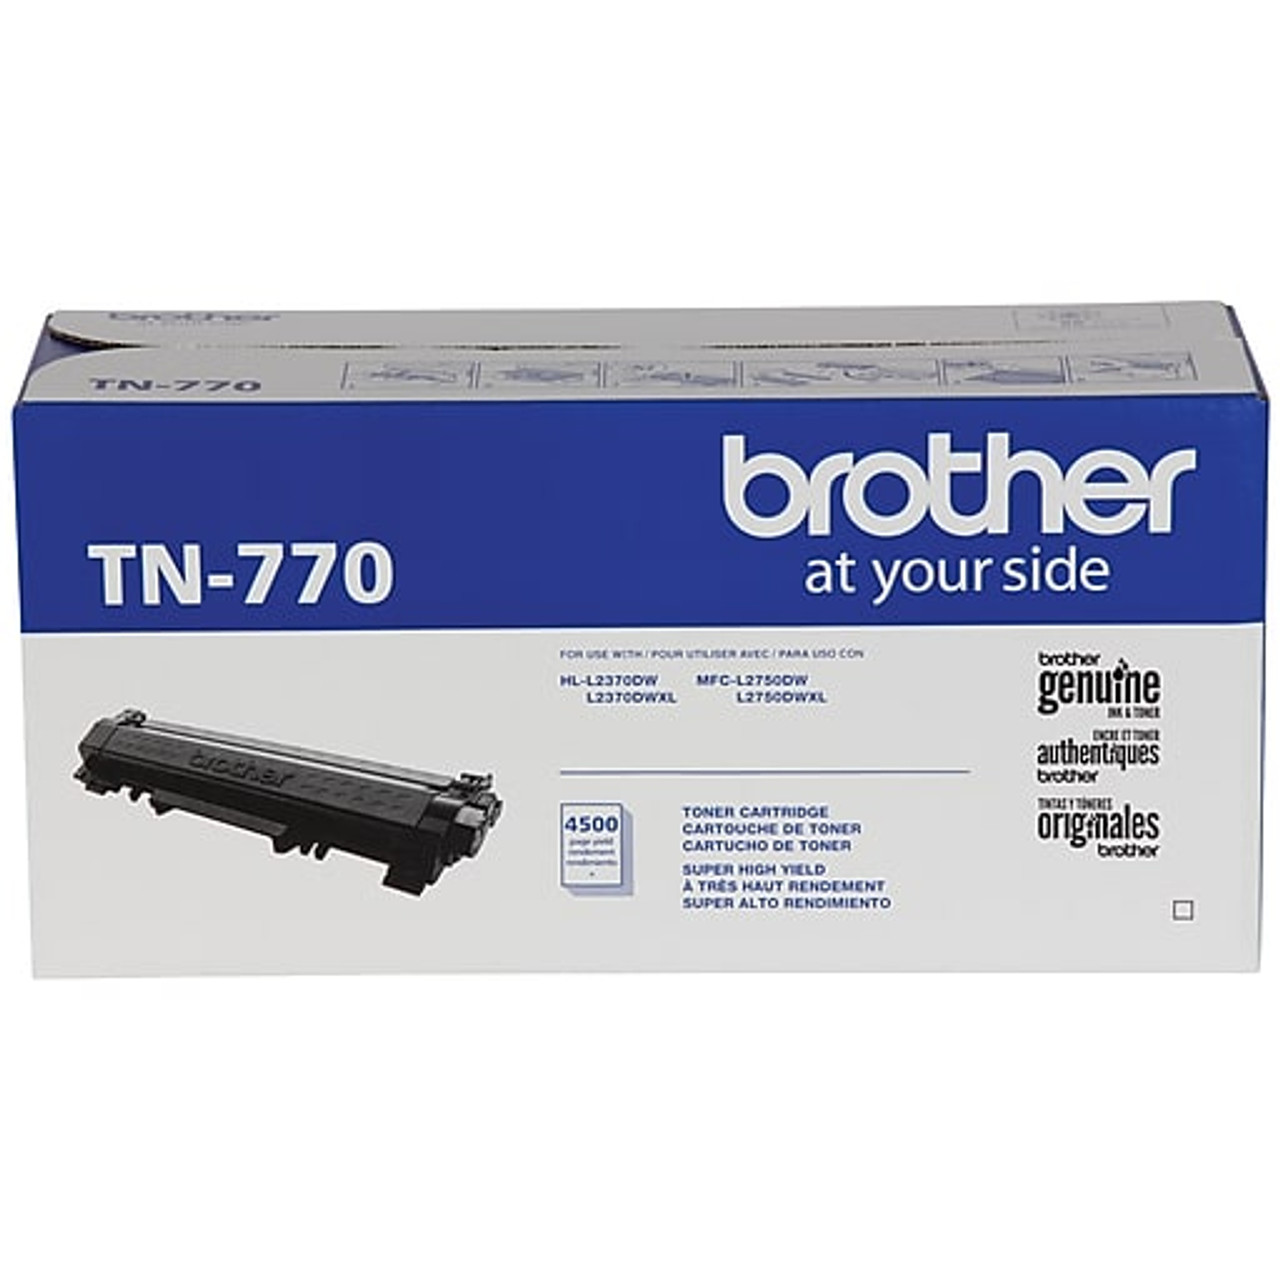 Brother Toner Compatibility Chart